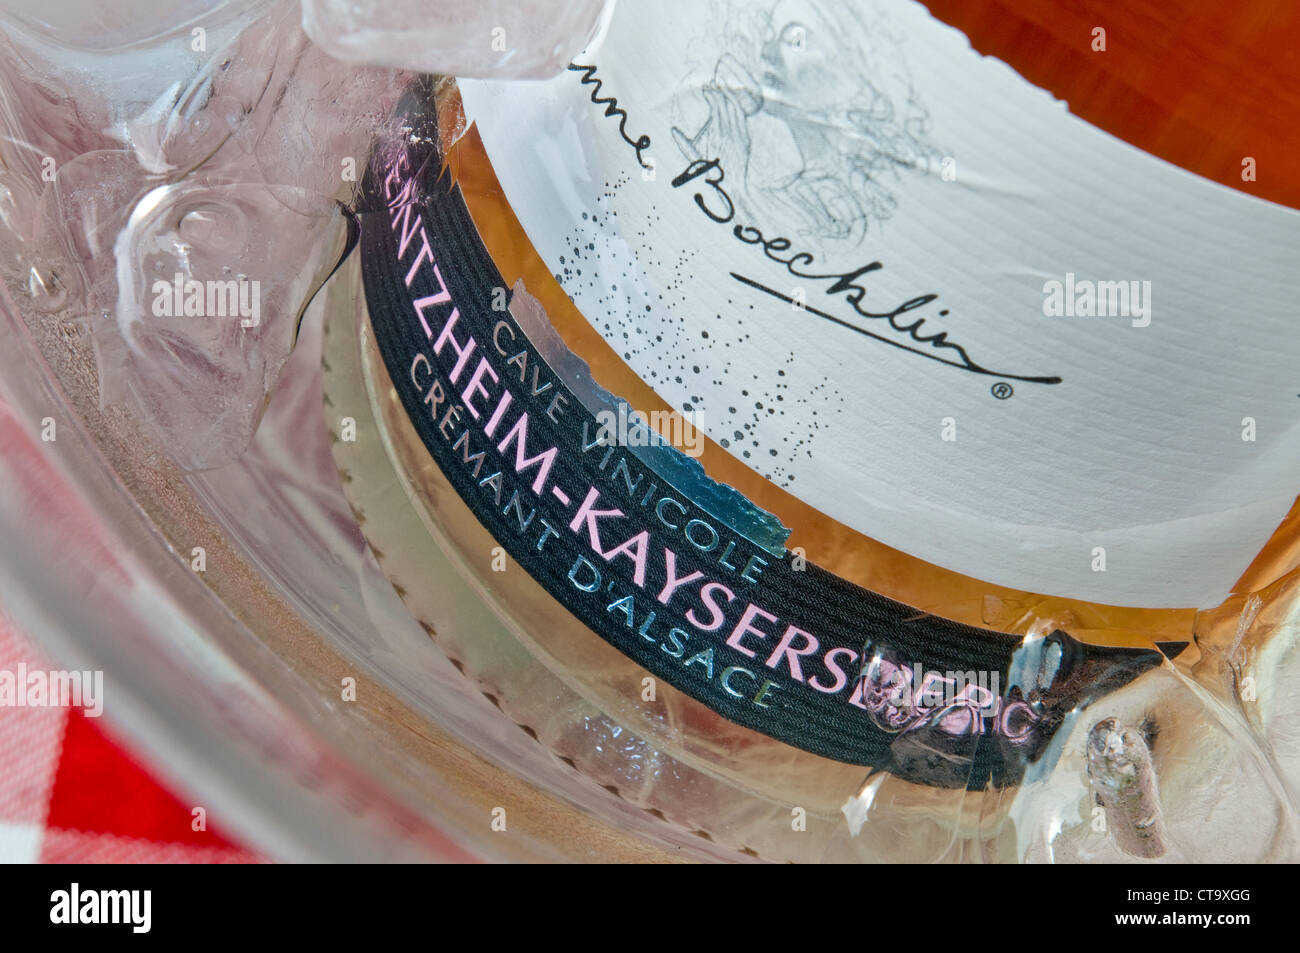 Close view on Anne Boecklin  'Cremant d'Alsace ' sparkling rose wine bottle label in ice cooler Stock Photo